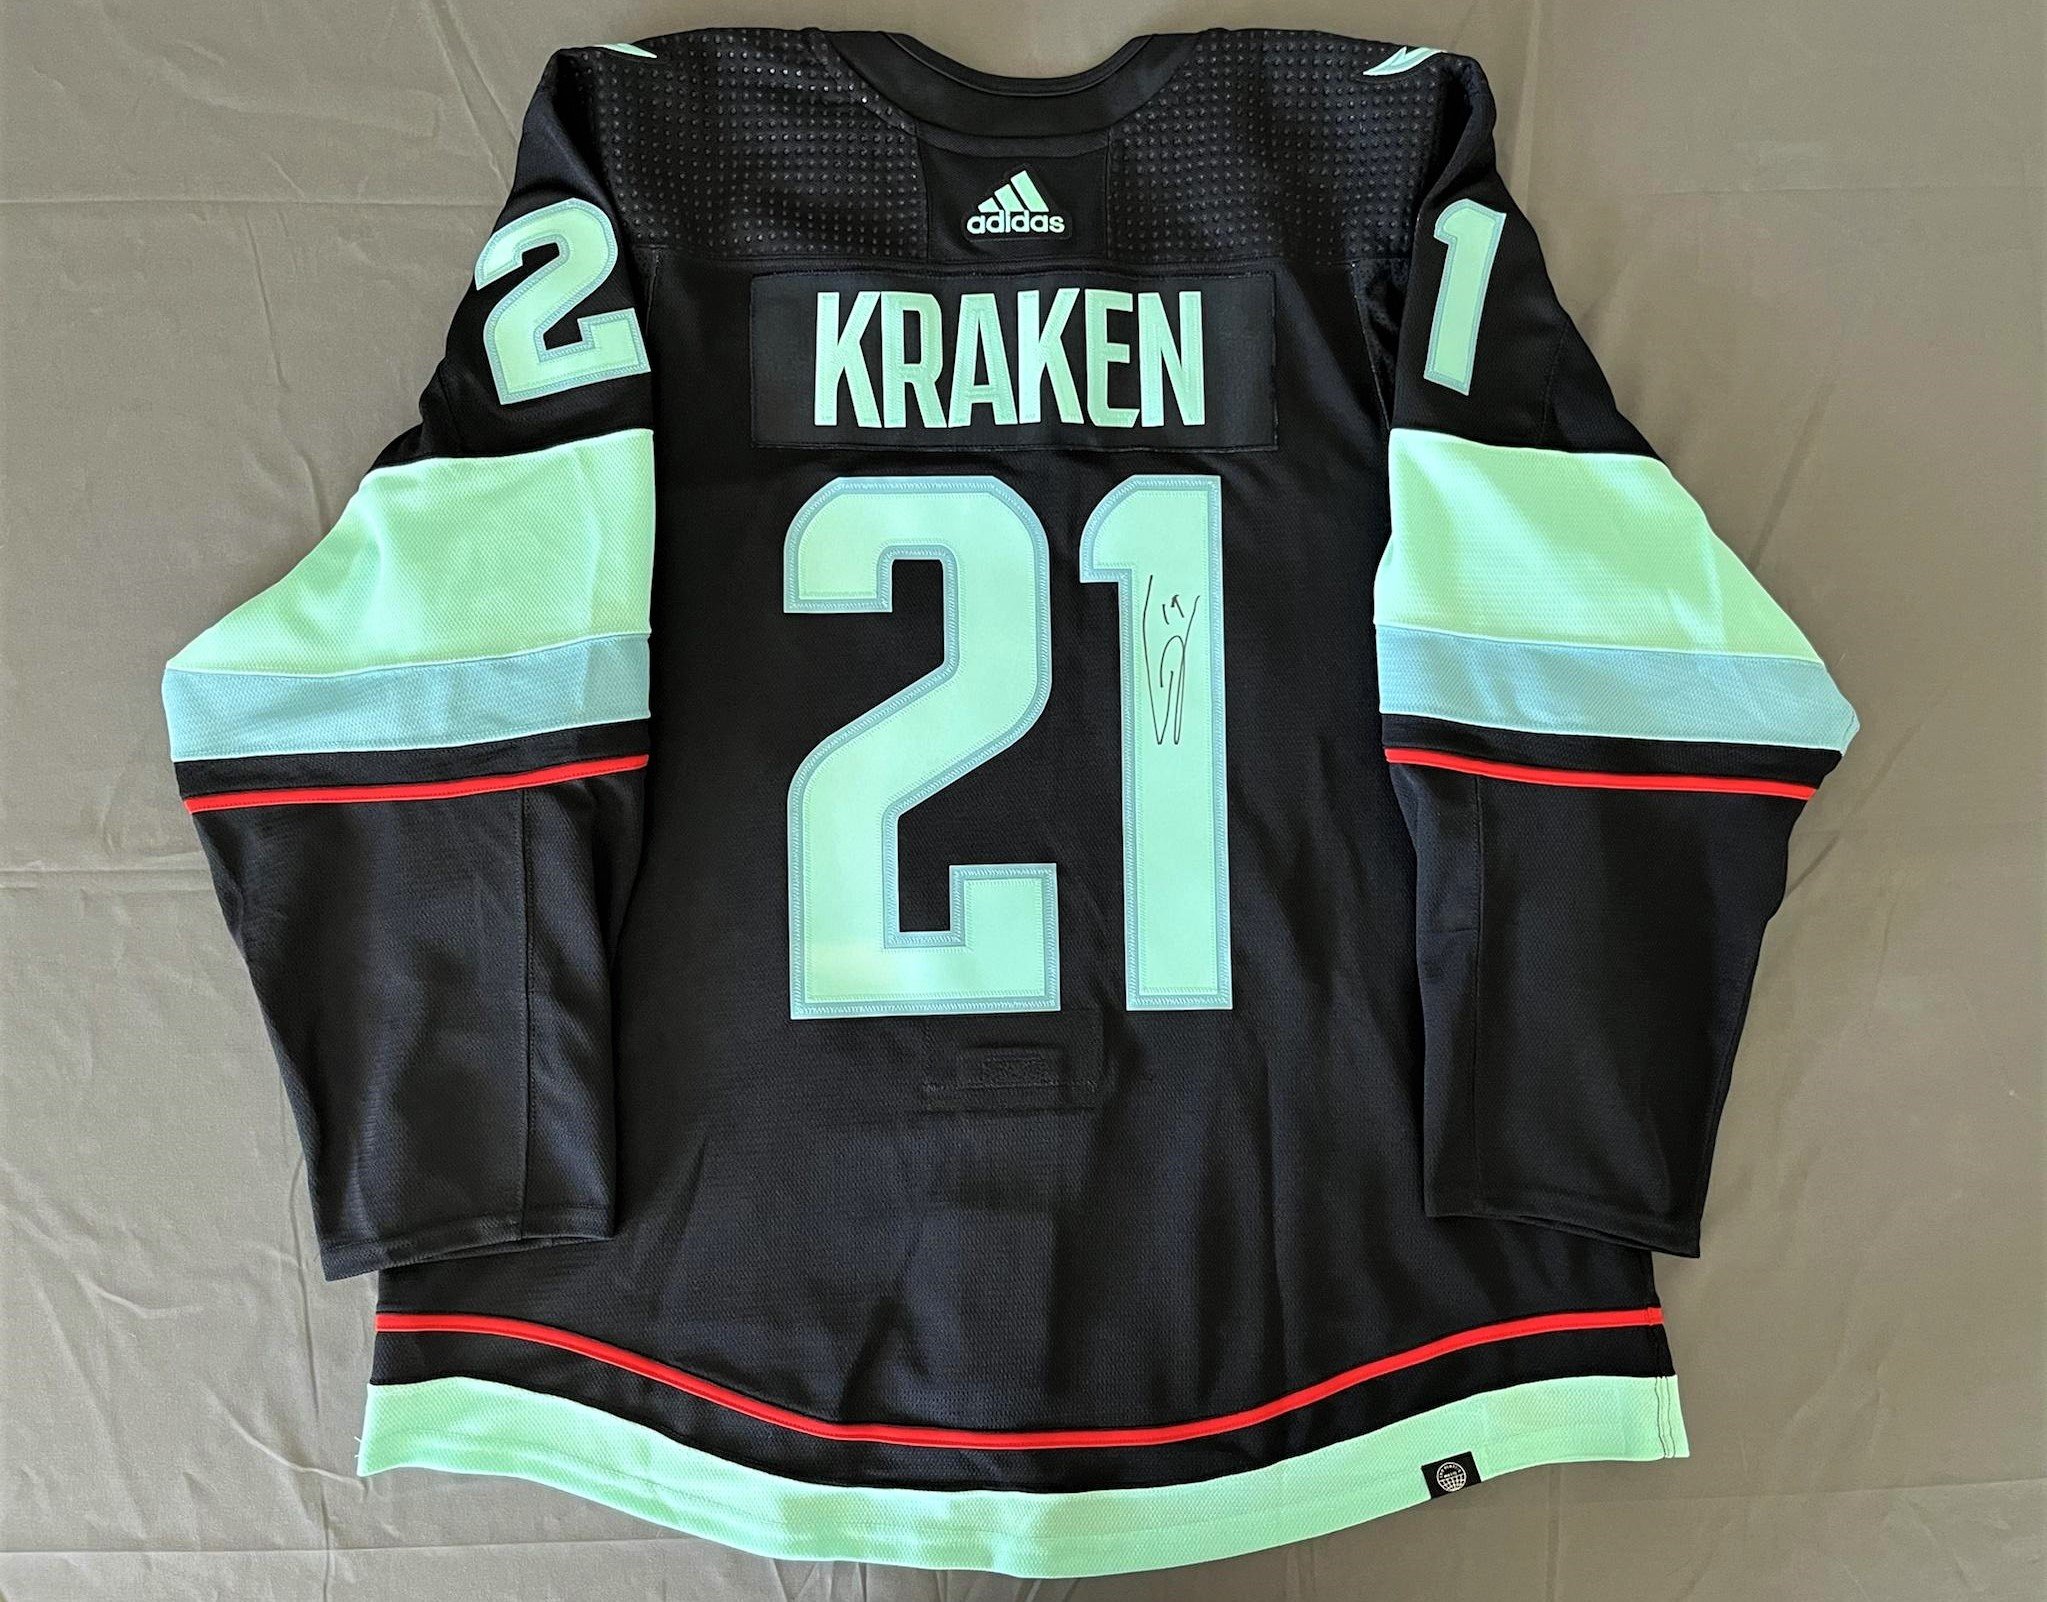 MeiGray Authenticates Kraken's Inaugural Game-Used Items